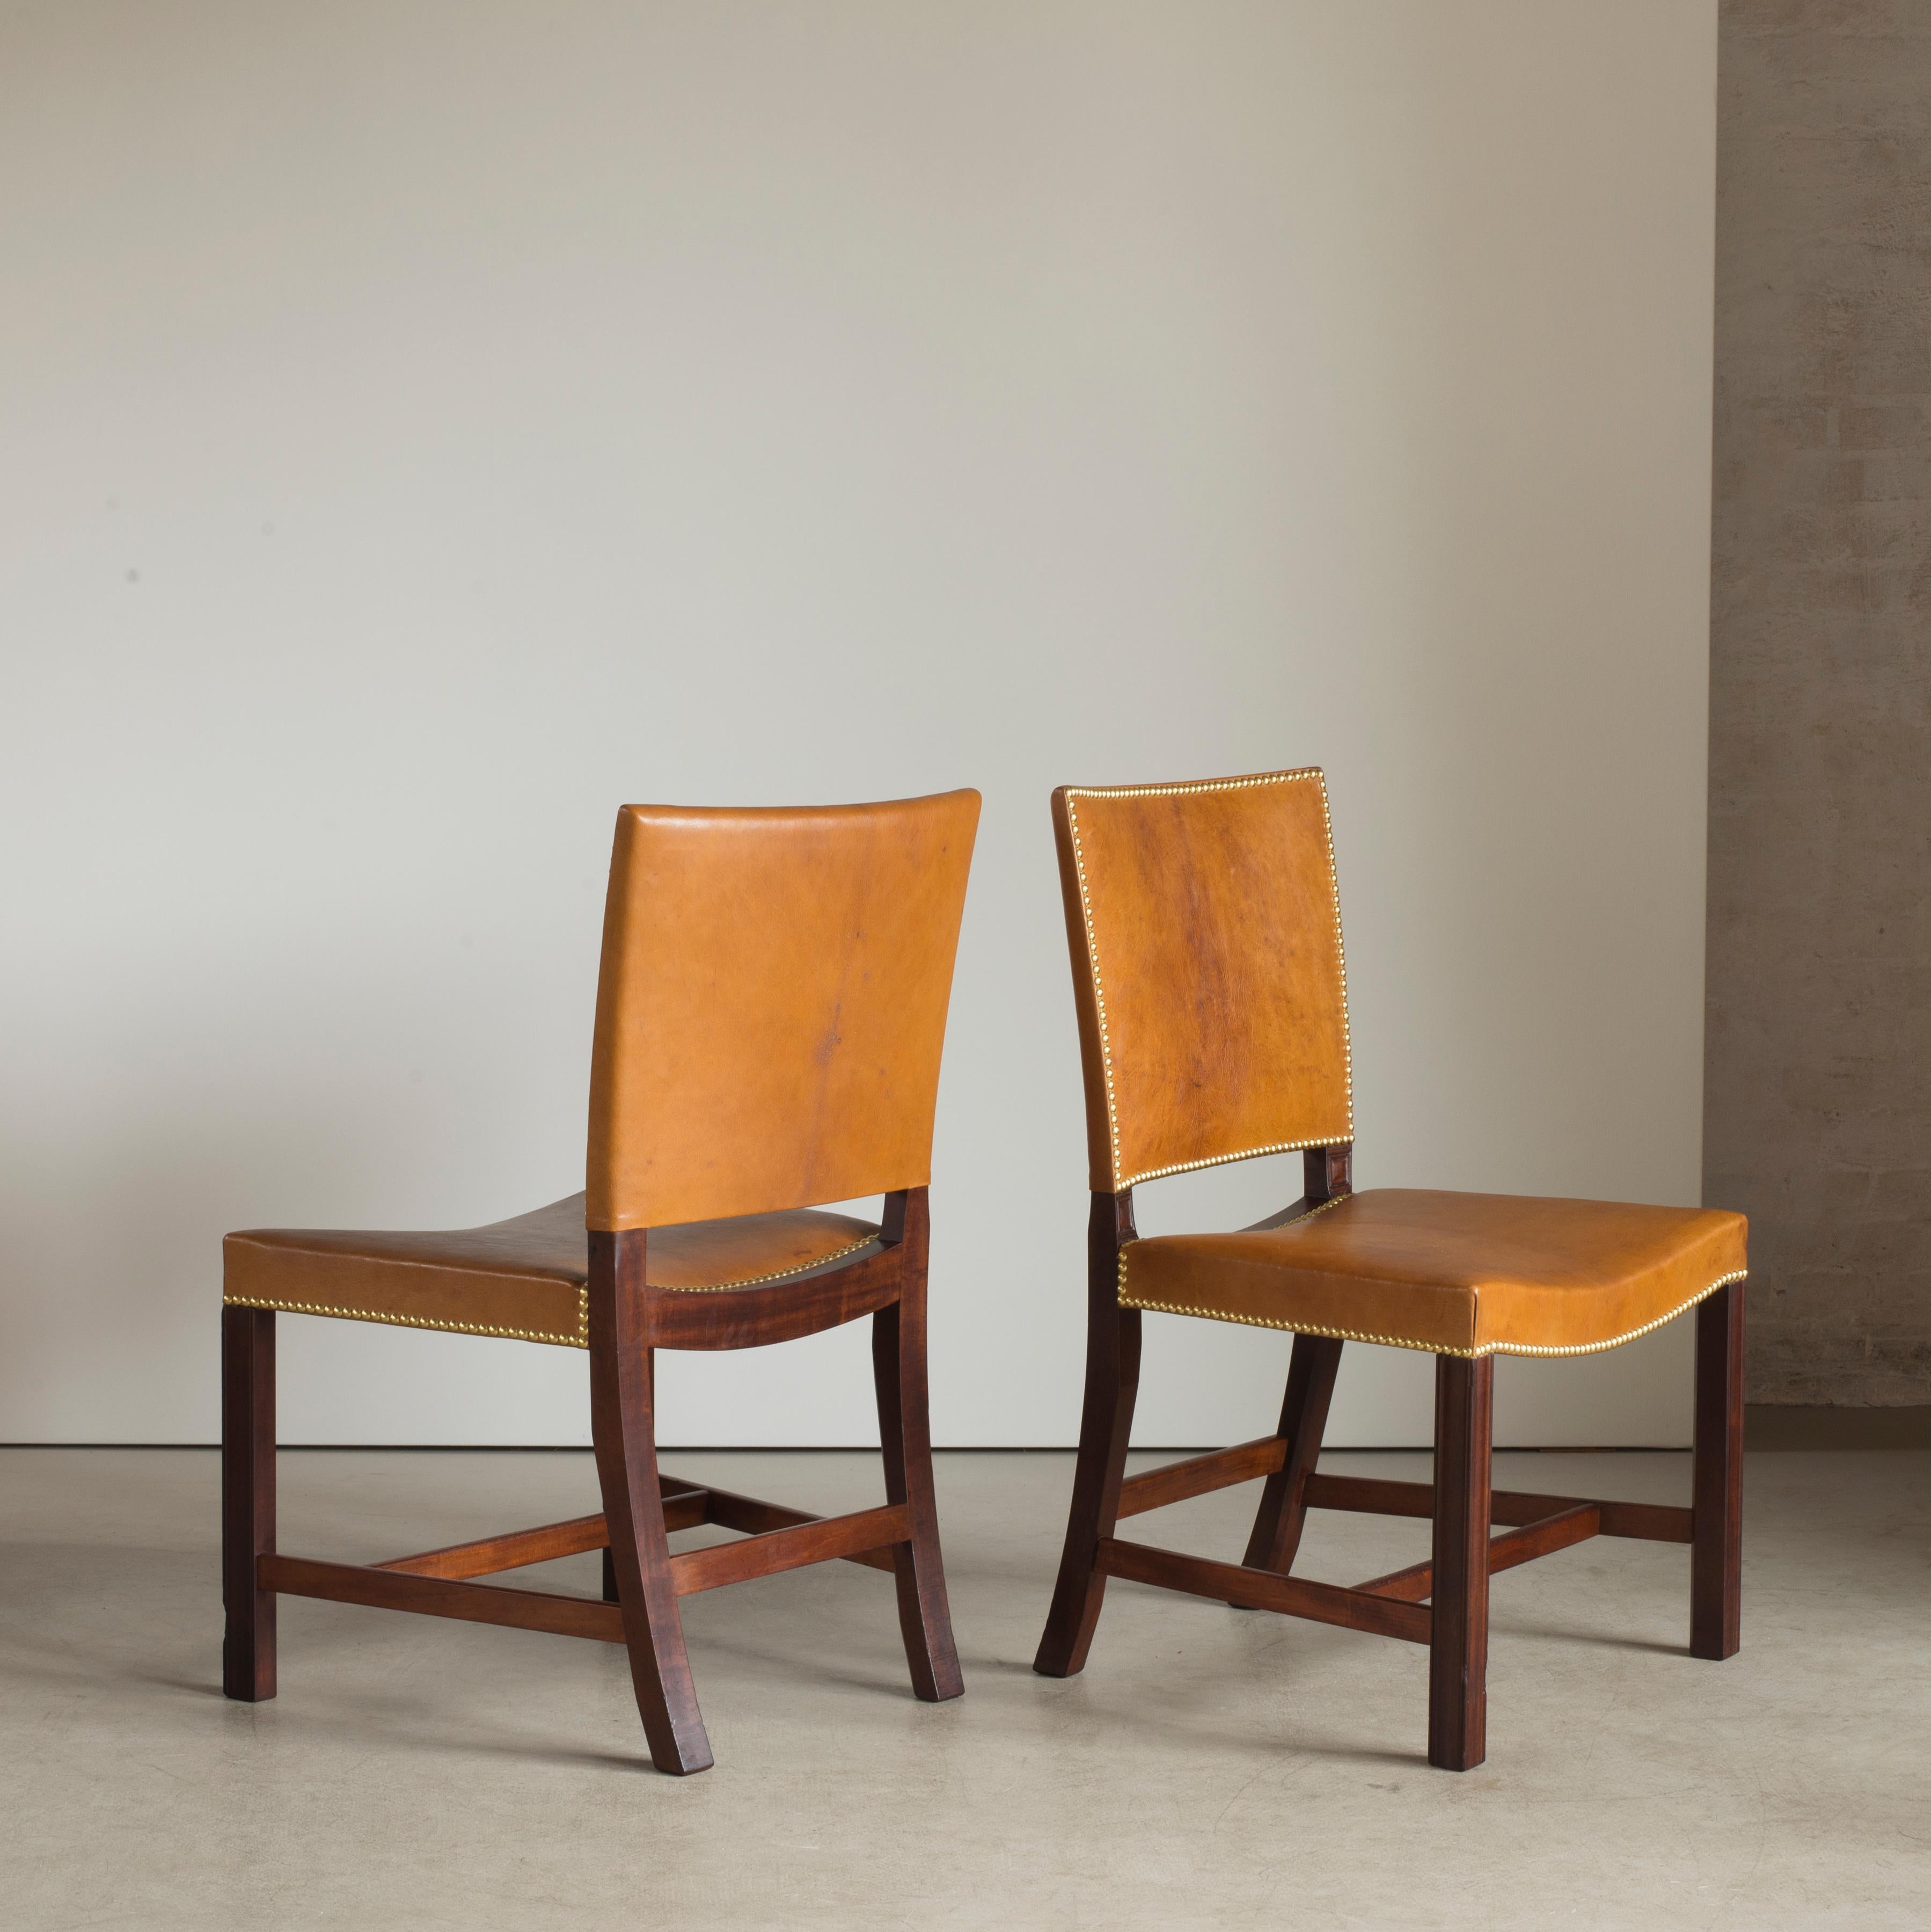 Scandinavian Modern Kaare Klint Red Chairs of Cuban Mahogany and Niger Leather